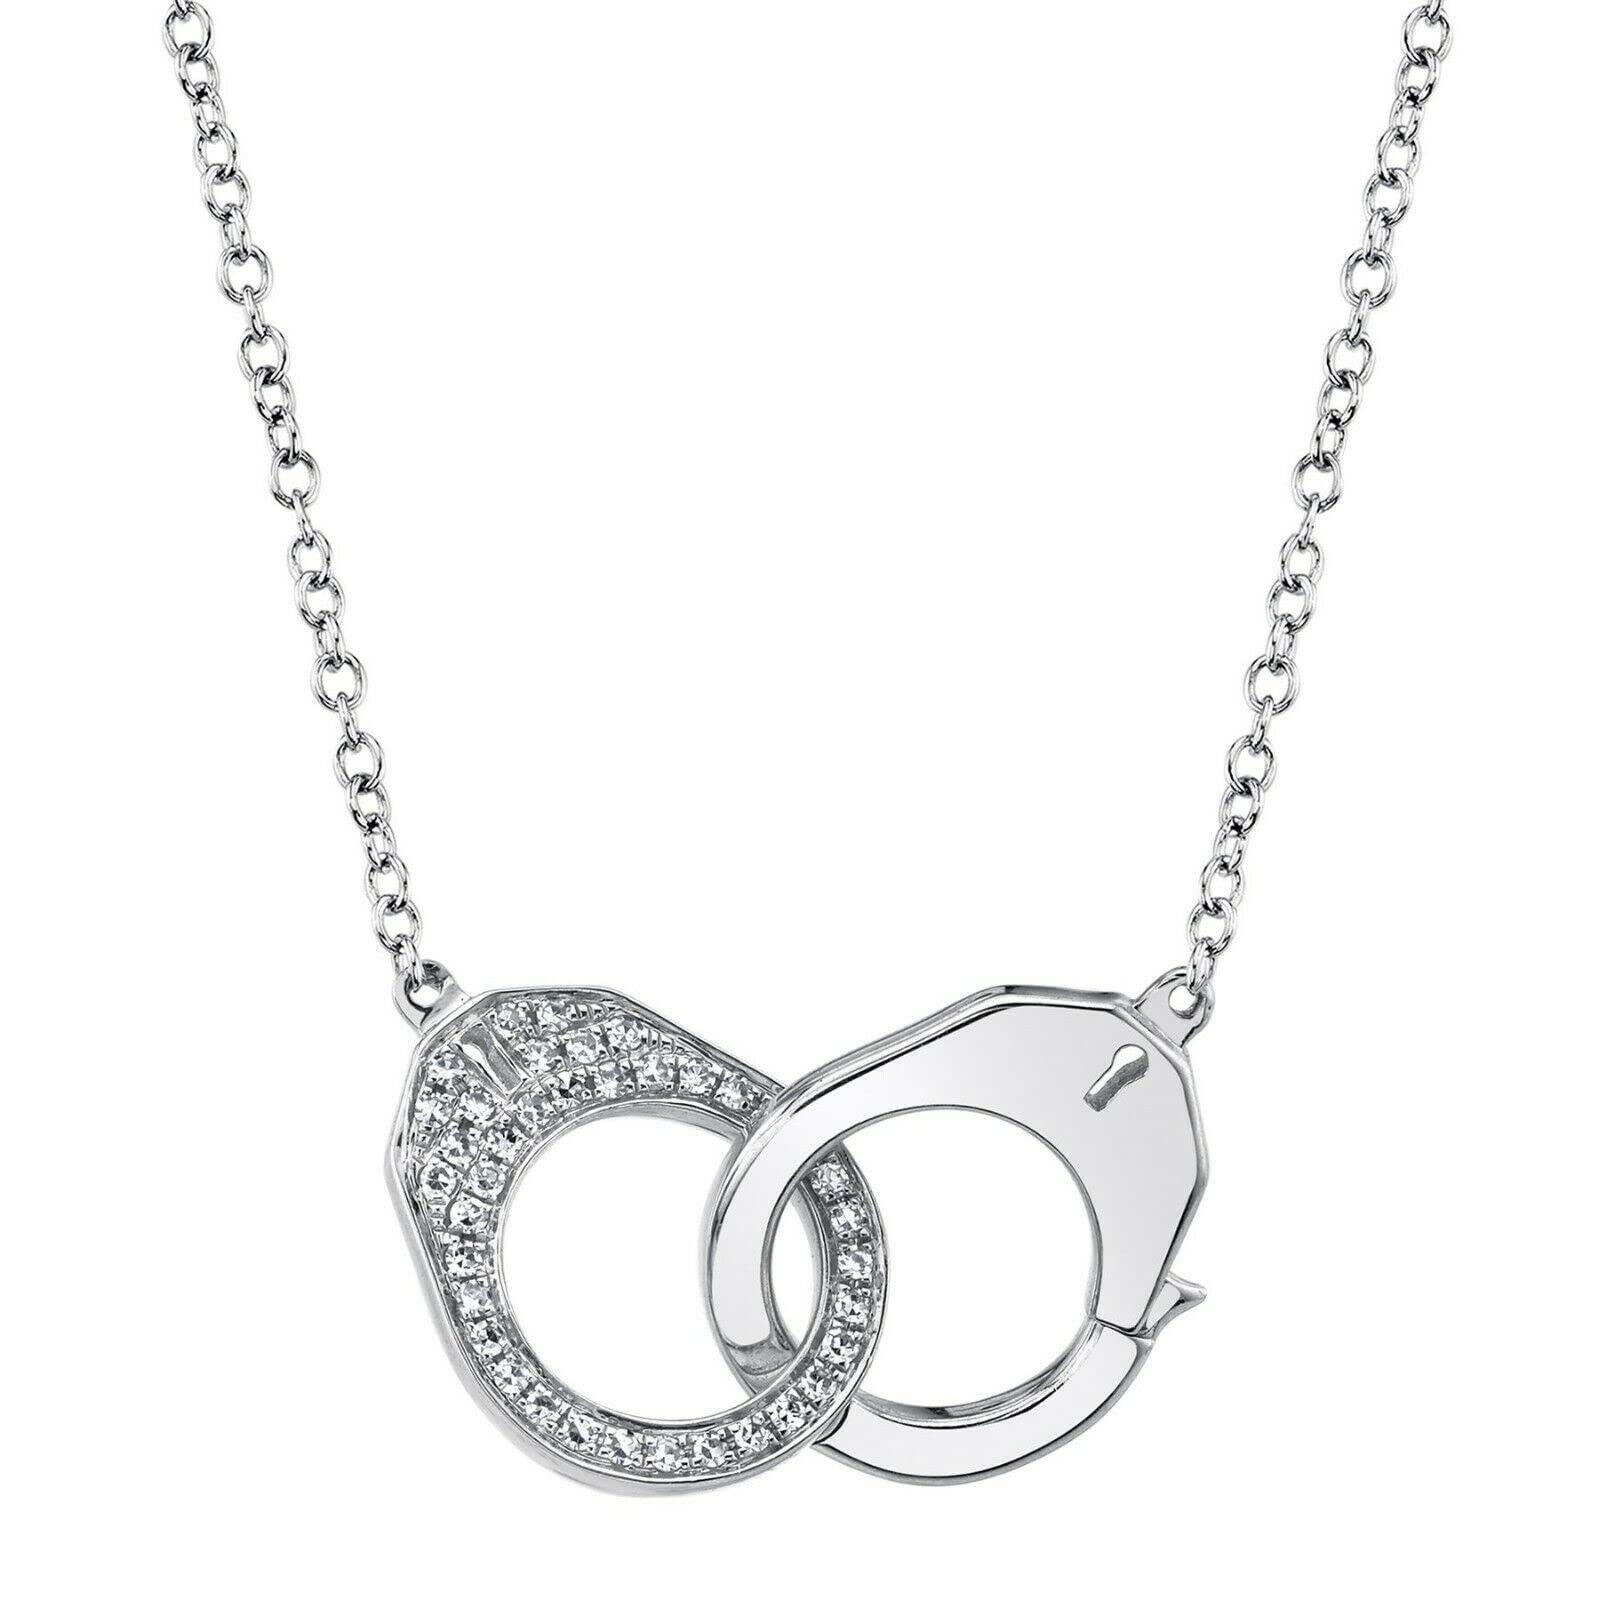 ABHI Jewelry Created Round Cut White Diamond 925 Sterling Silver 14K White Gold Finish Diamond Handcuffs Pendant Necklace for Women's & Girl's